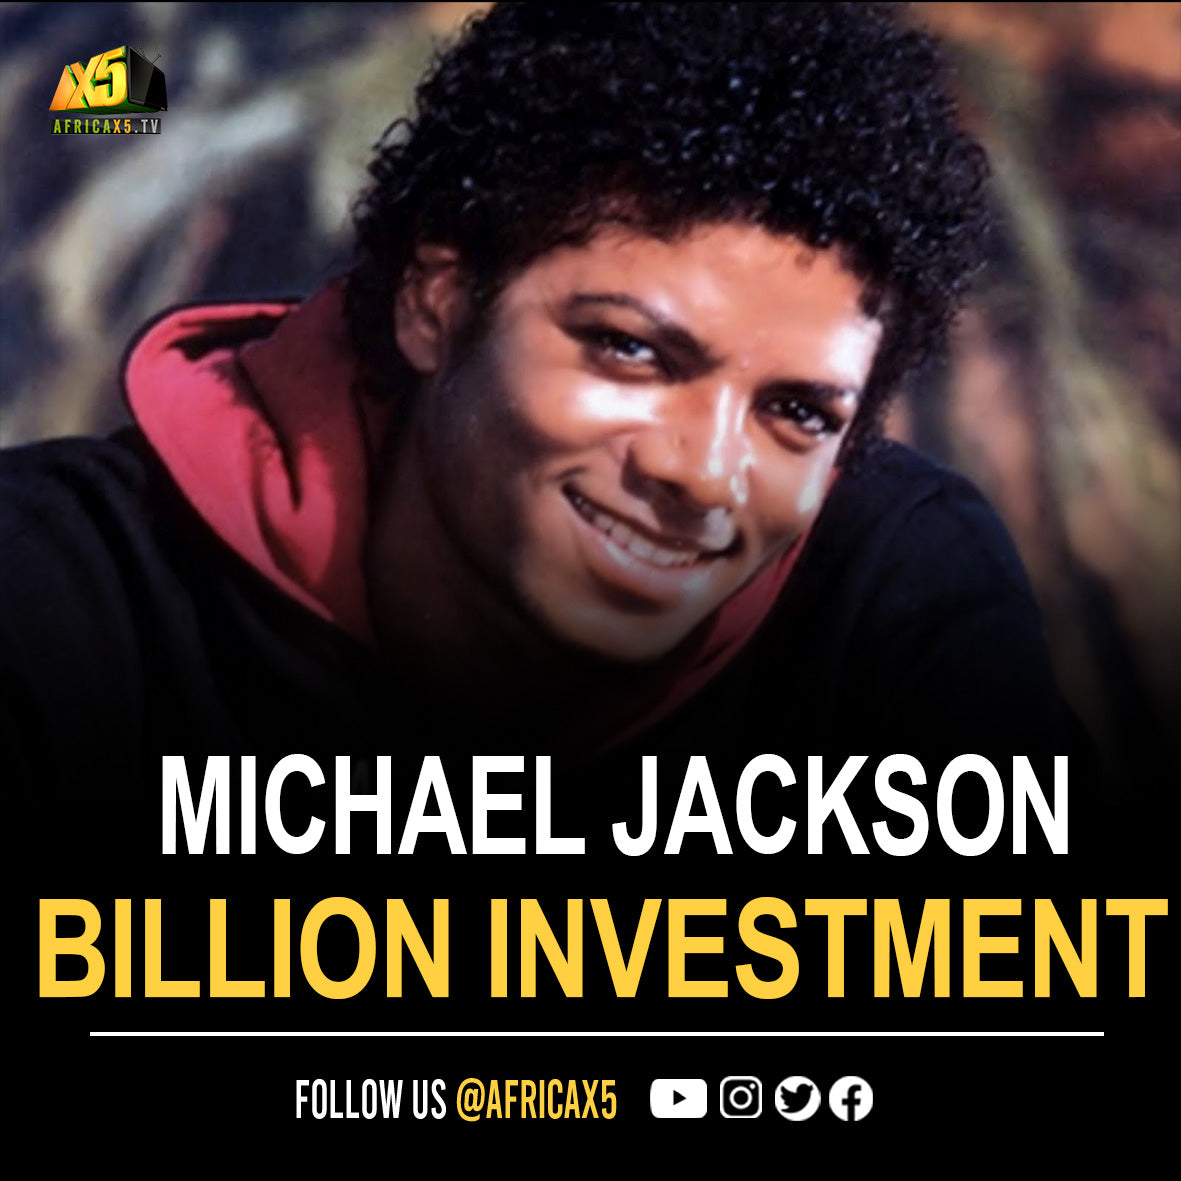 How Michael Jackson turned a $47M investment into $1.5 Billion after taking advice from Paul McCartney and buying the Beatles catalog.